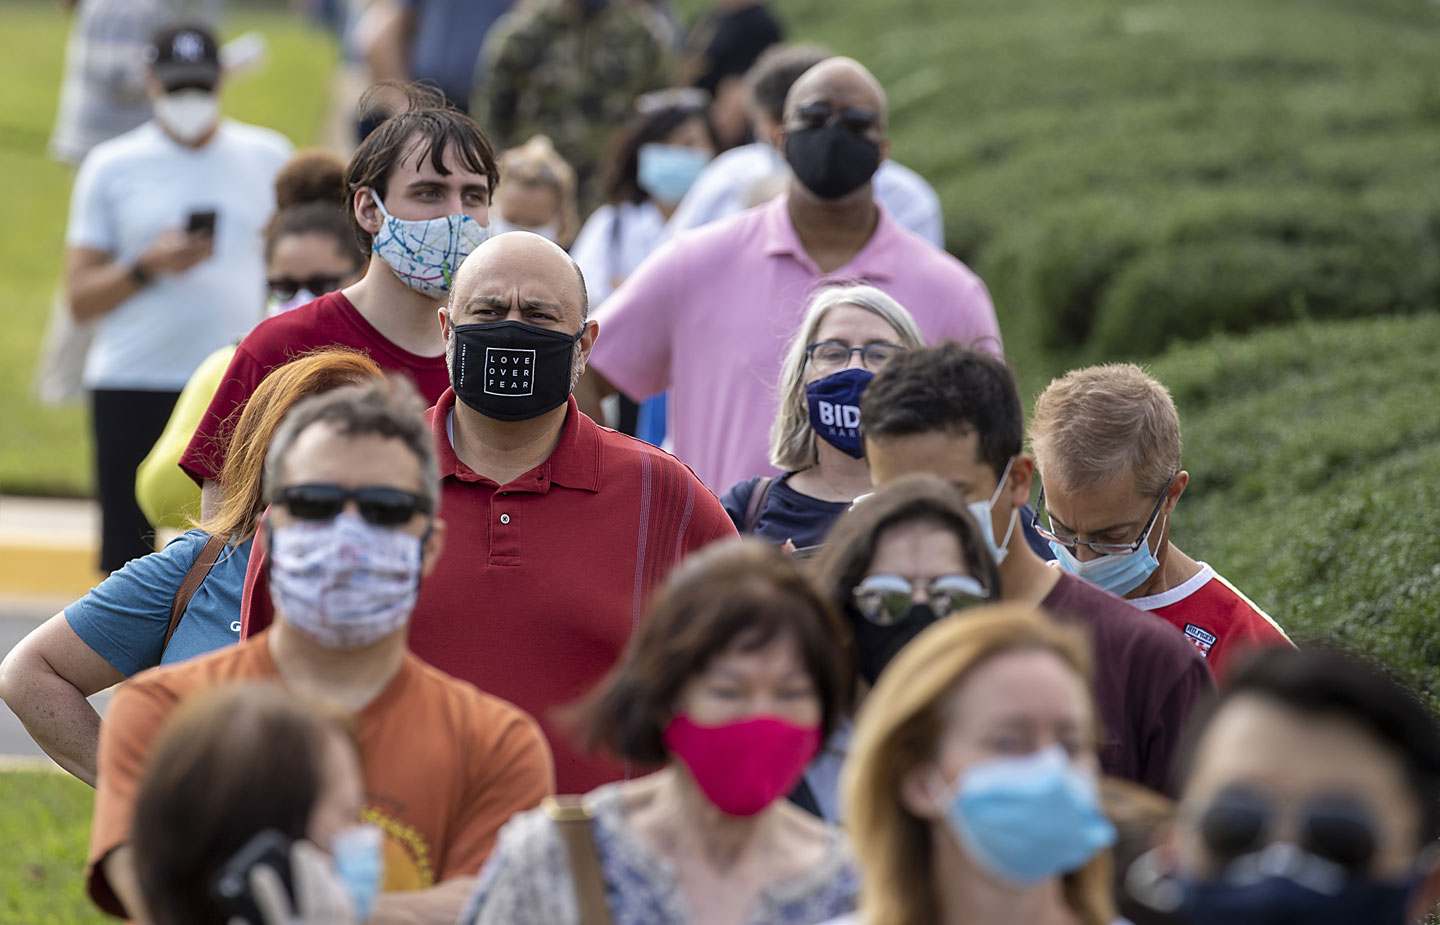 Image of people waiting in line to vote wearing masks